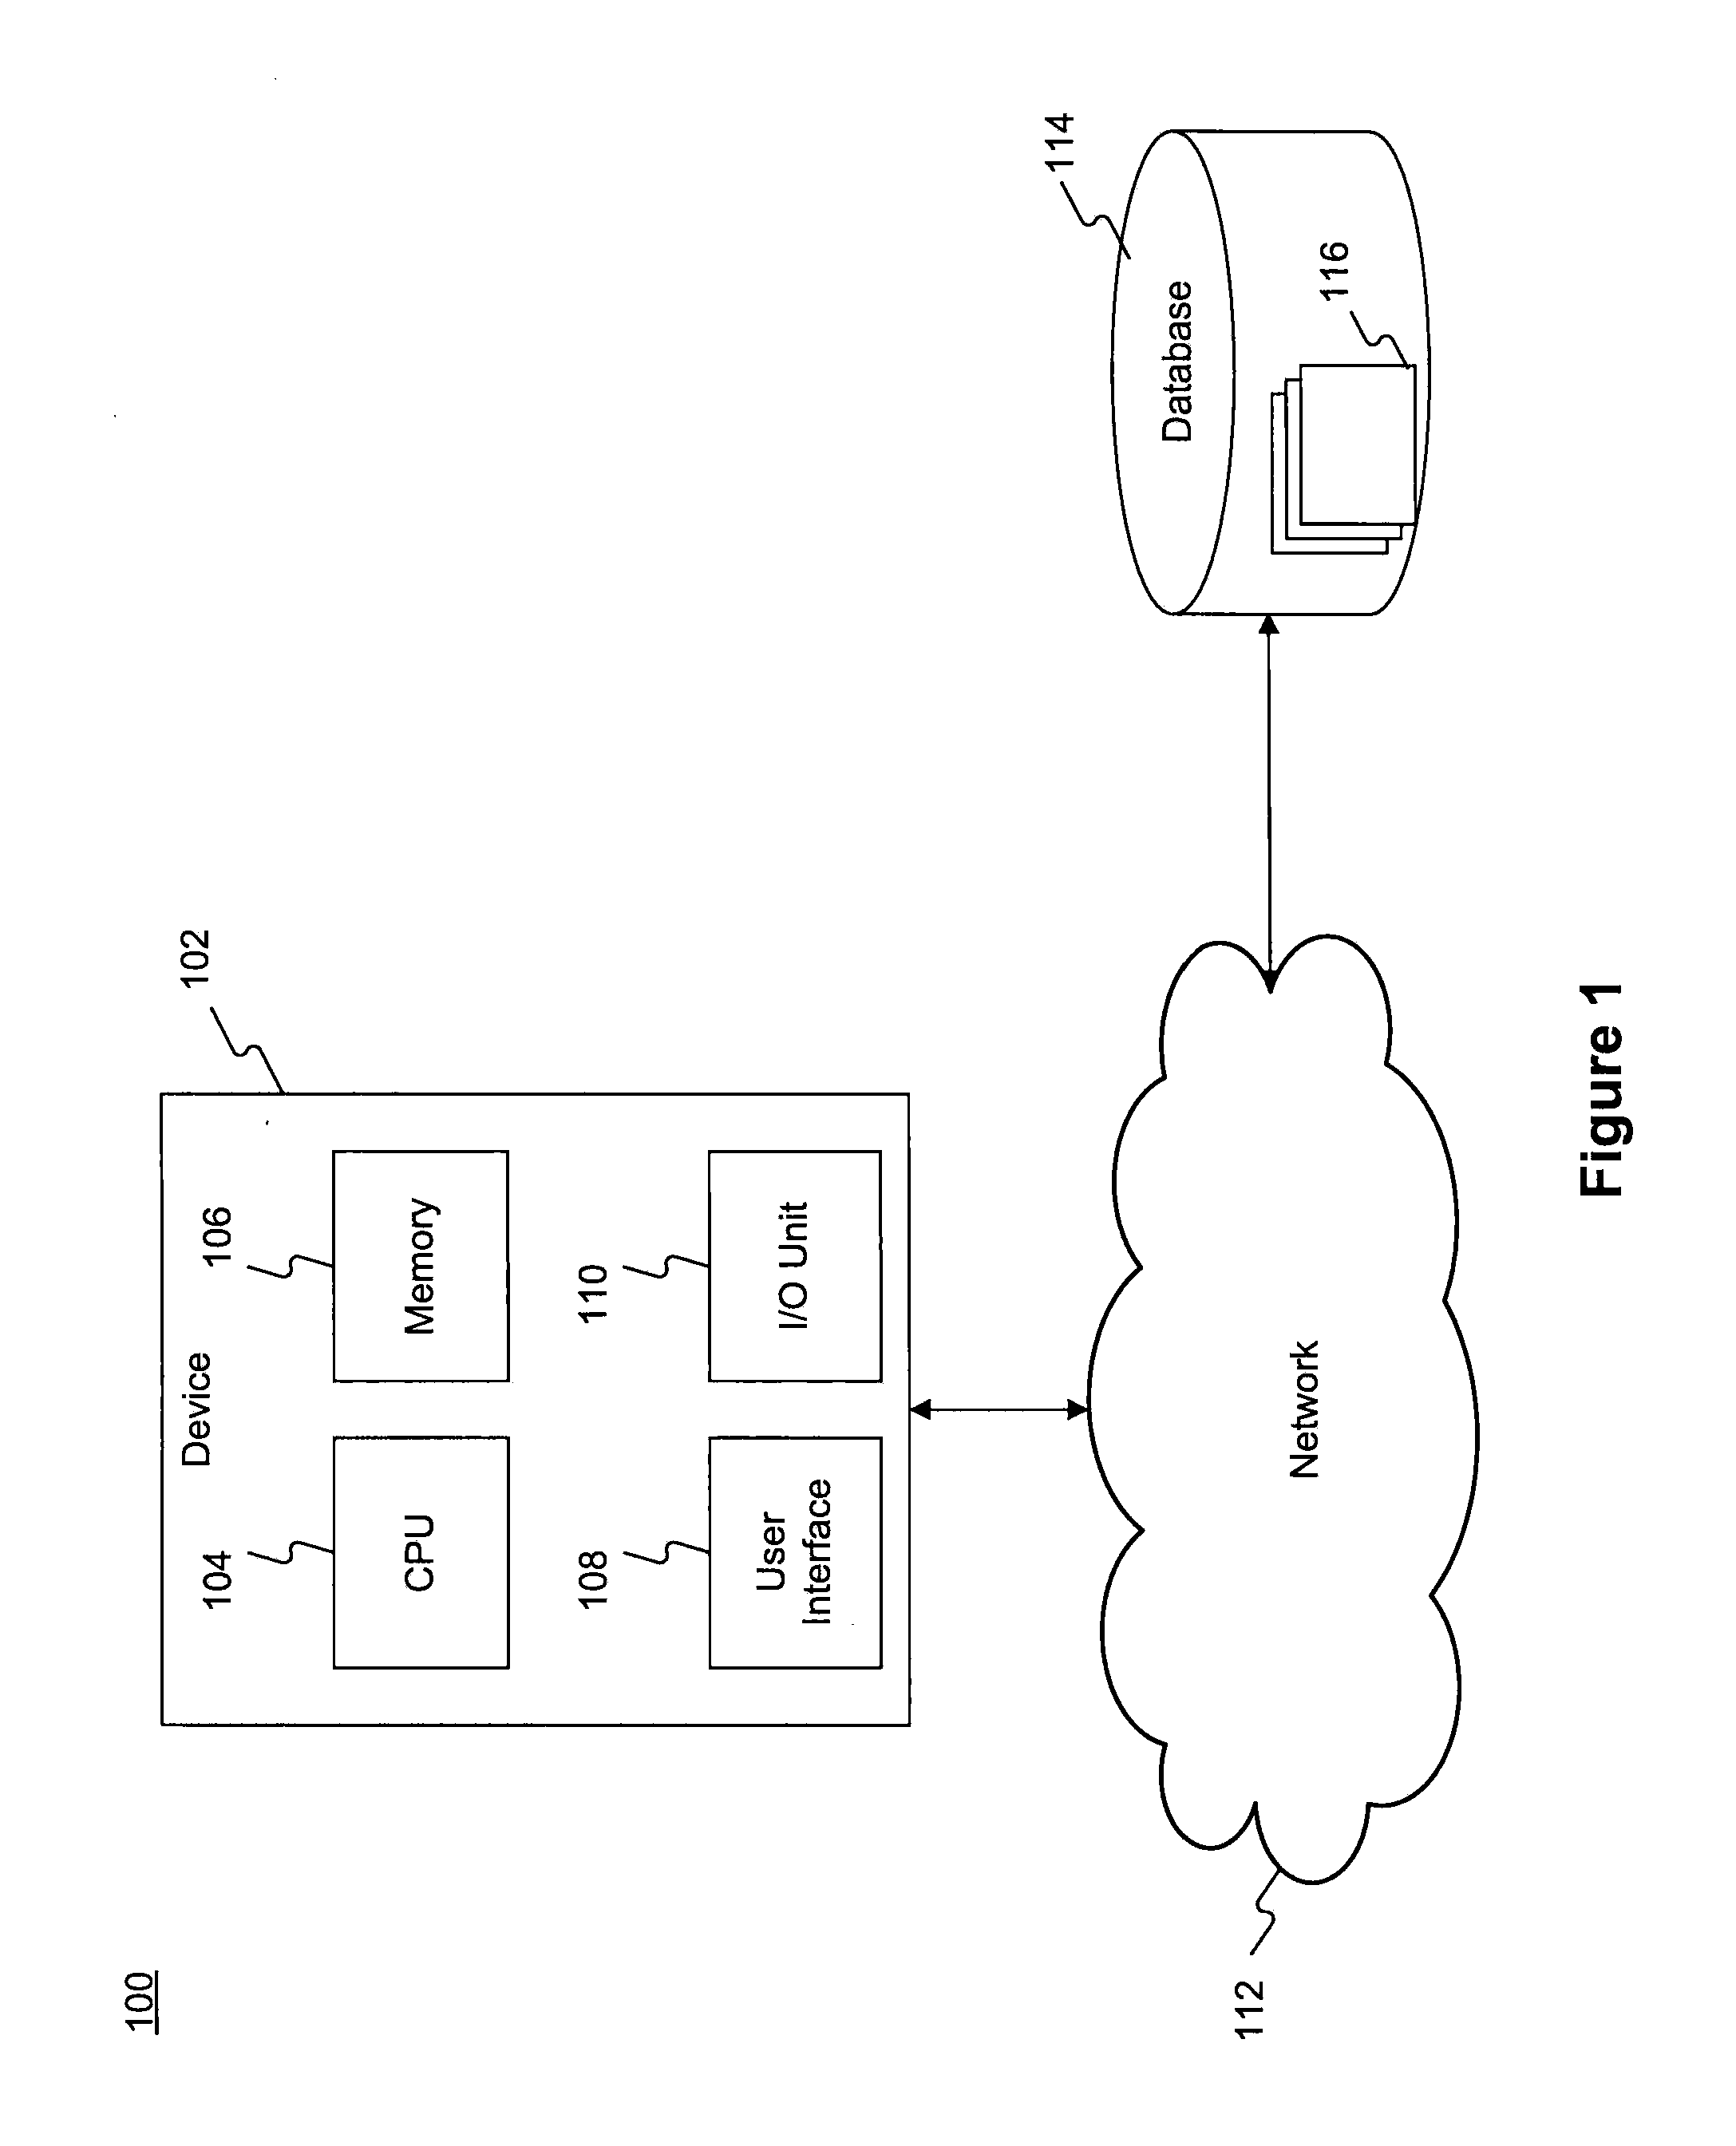 Systems and methods for analyzing patent related documents